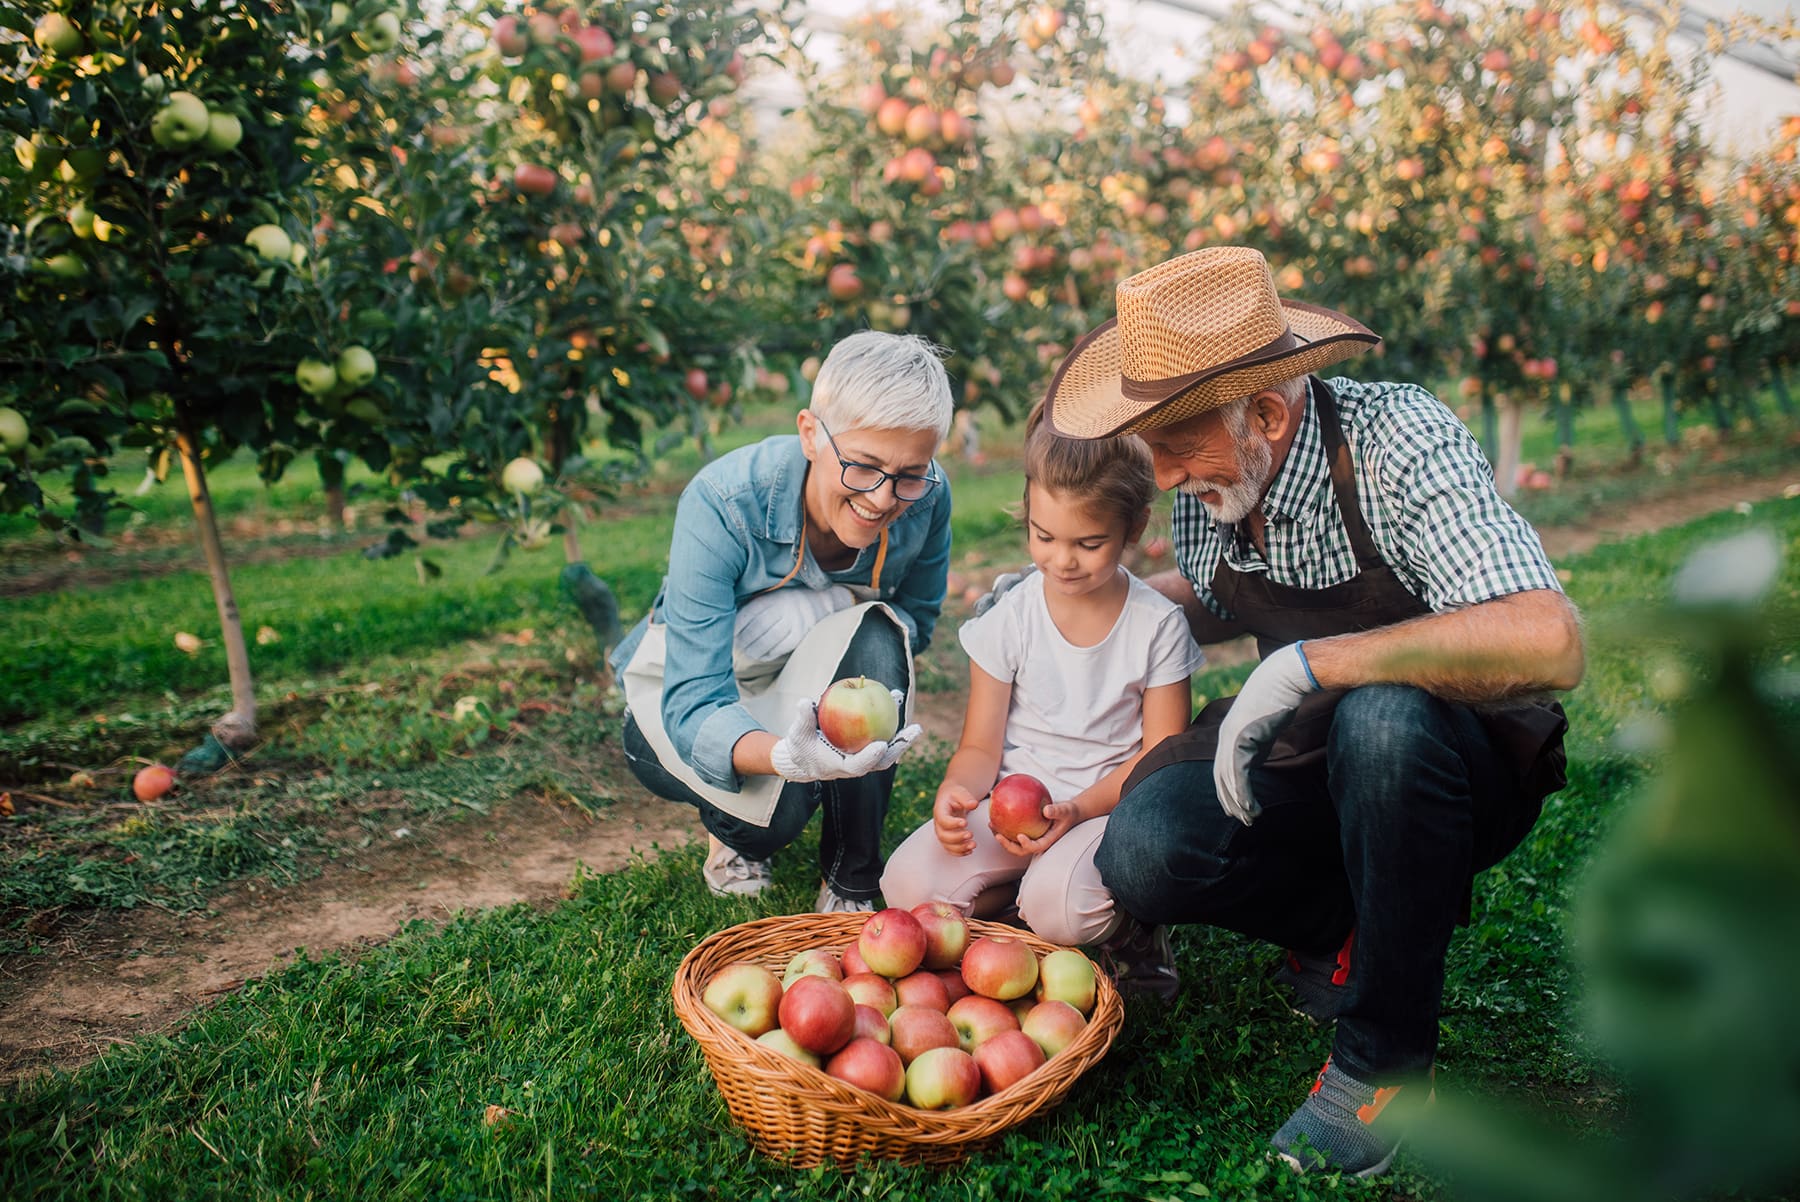 senior grandparents at an apple orchard with their young granddaughter, looking at a basket of red apples